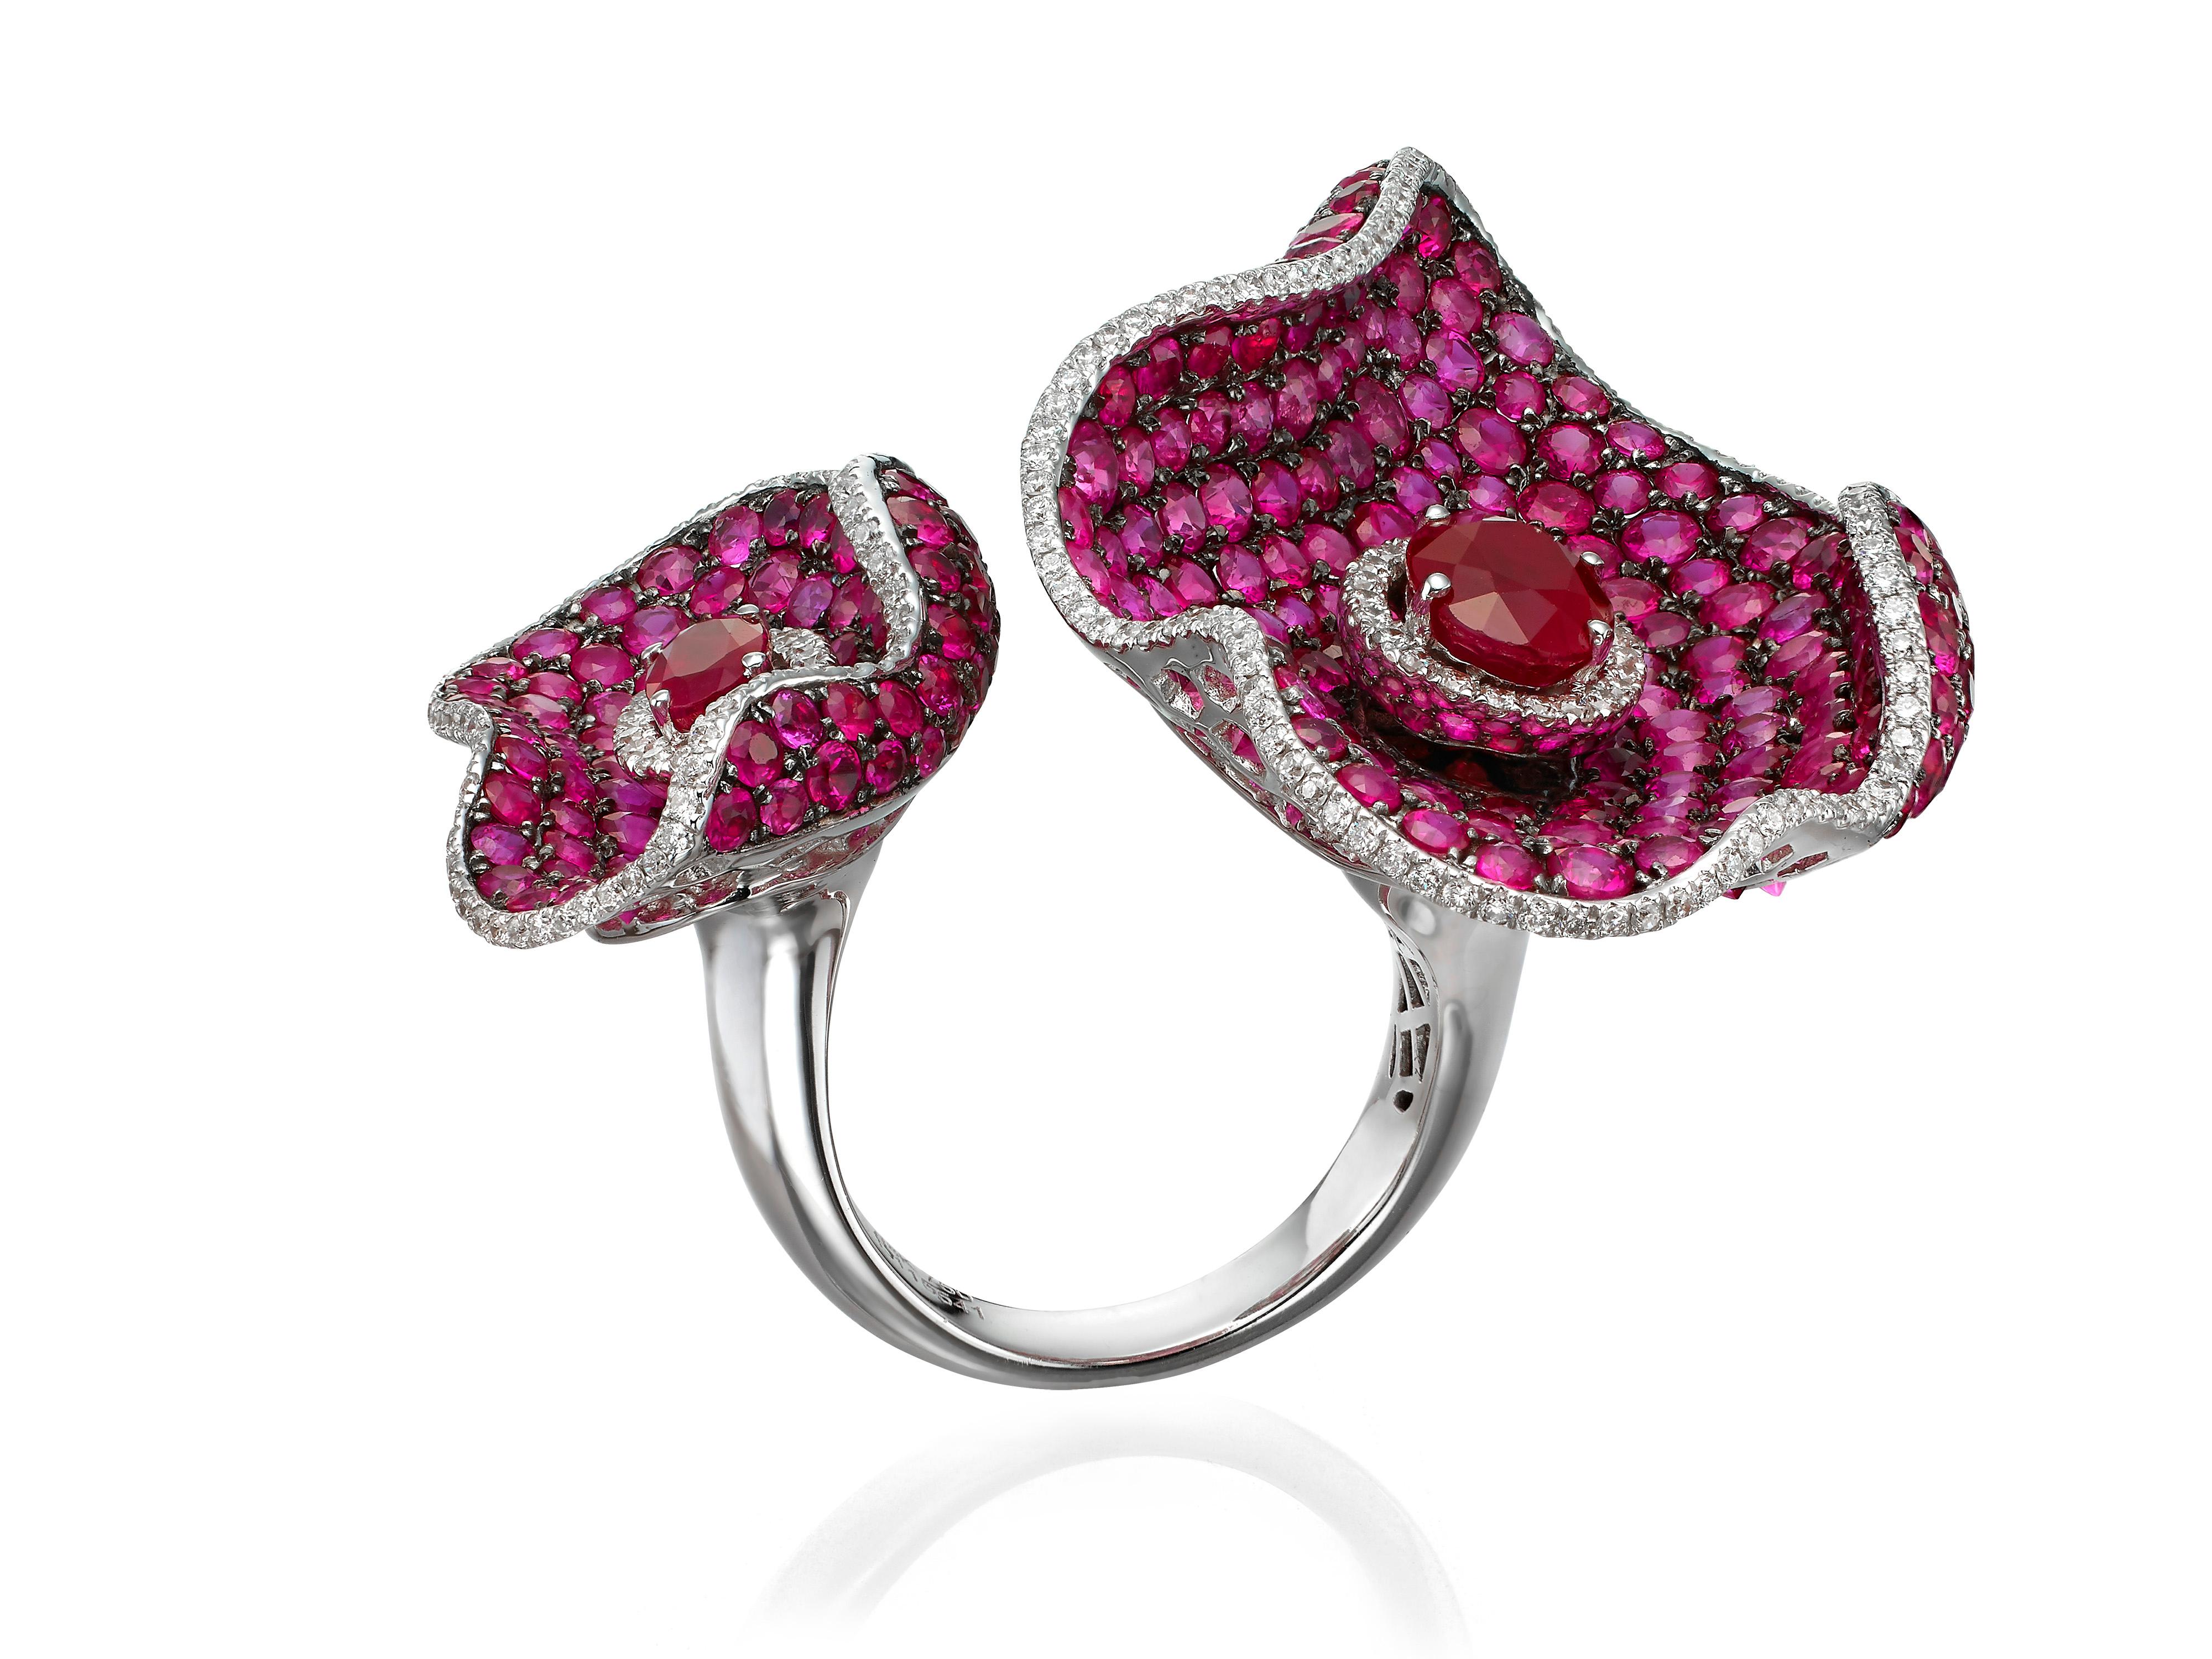 Crafted in an open silhouette, Butani's ring features two oval rubies (totaling 2.49 carats) and crusted with 1348 carats of round rubies and 0.98 carats of round diamonds.  Set in 18K white gold.  Currently a ring size US 7.  For other sizes,